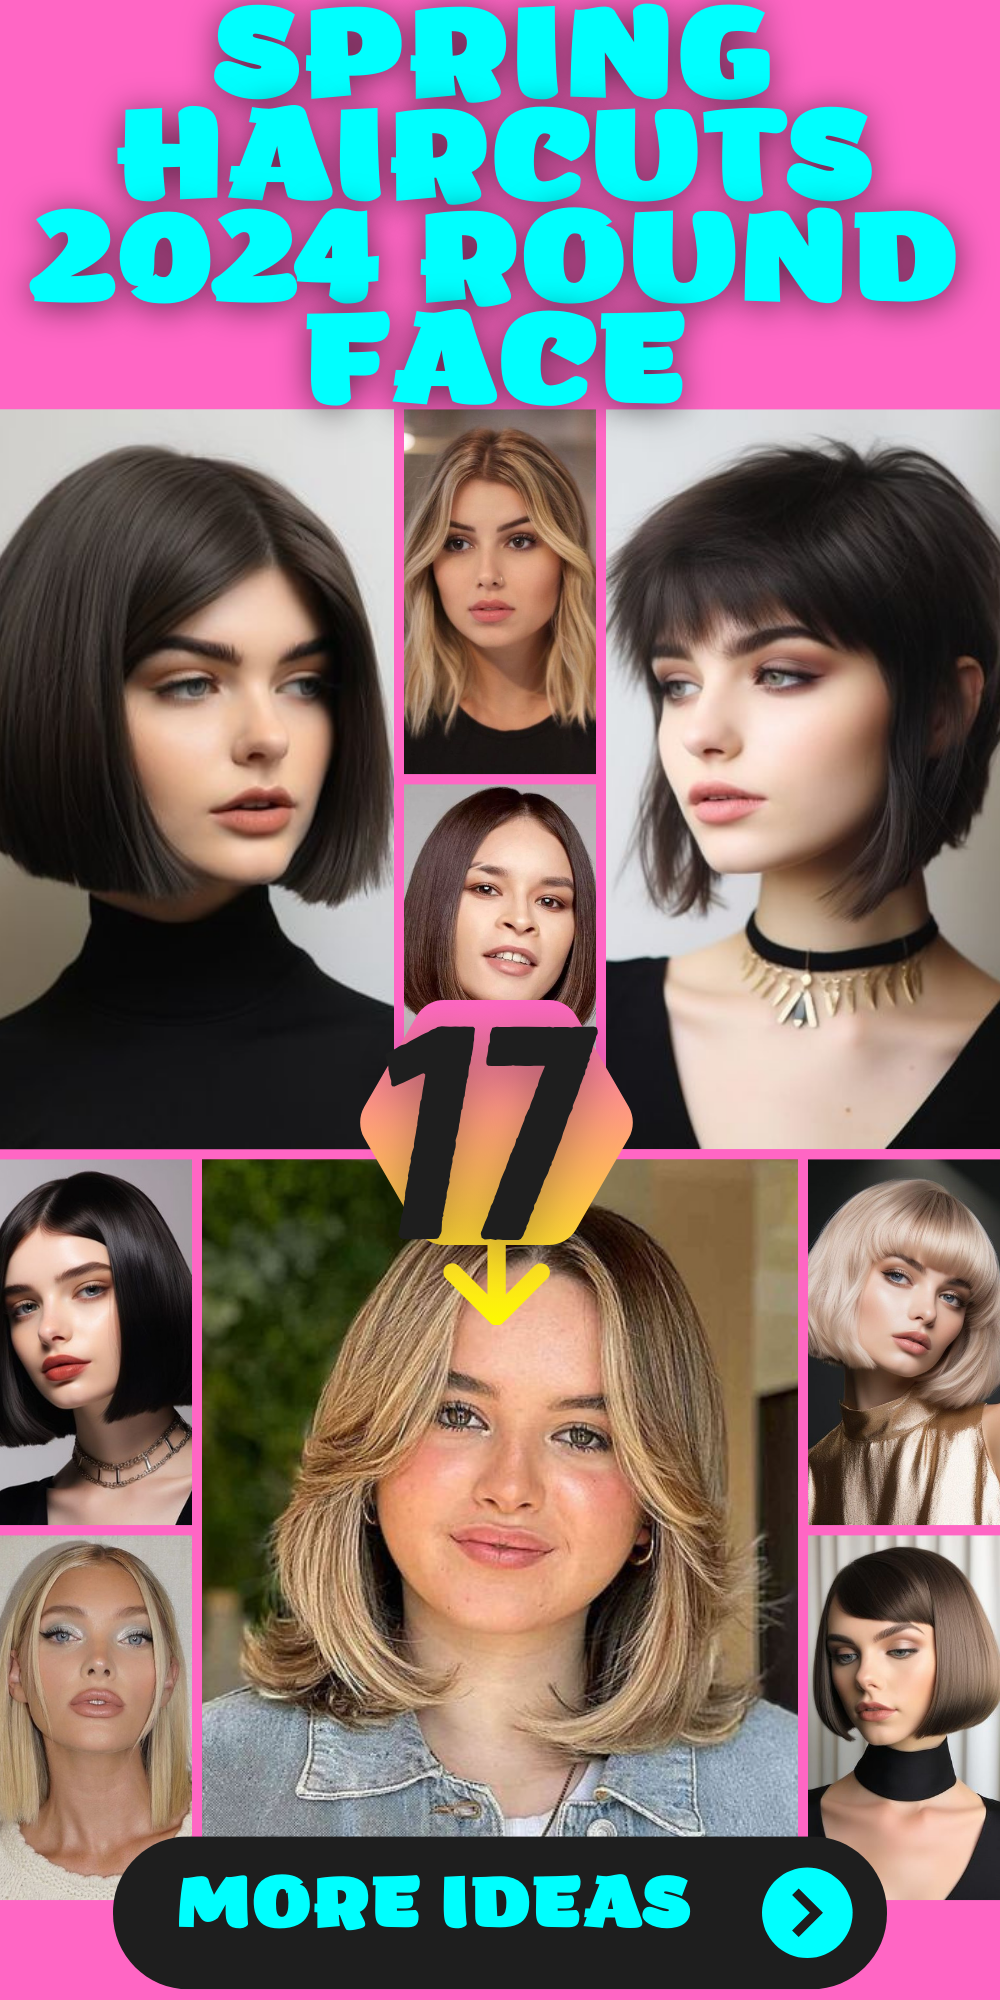 Spring Haircuts 2024 for Round Face: Trends, Styles, and Inspiration